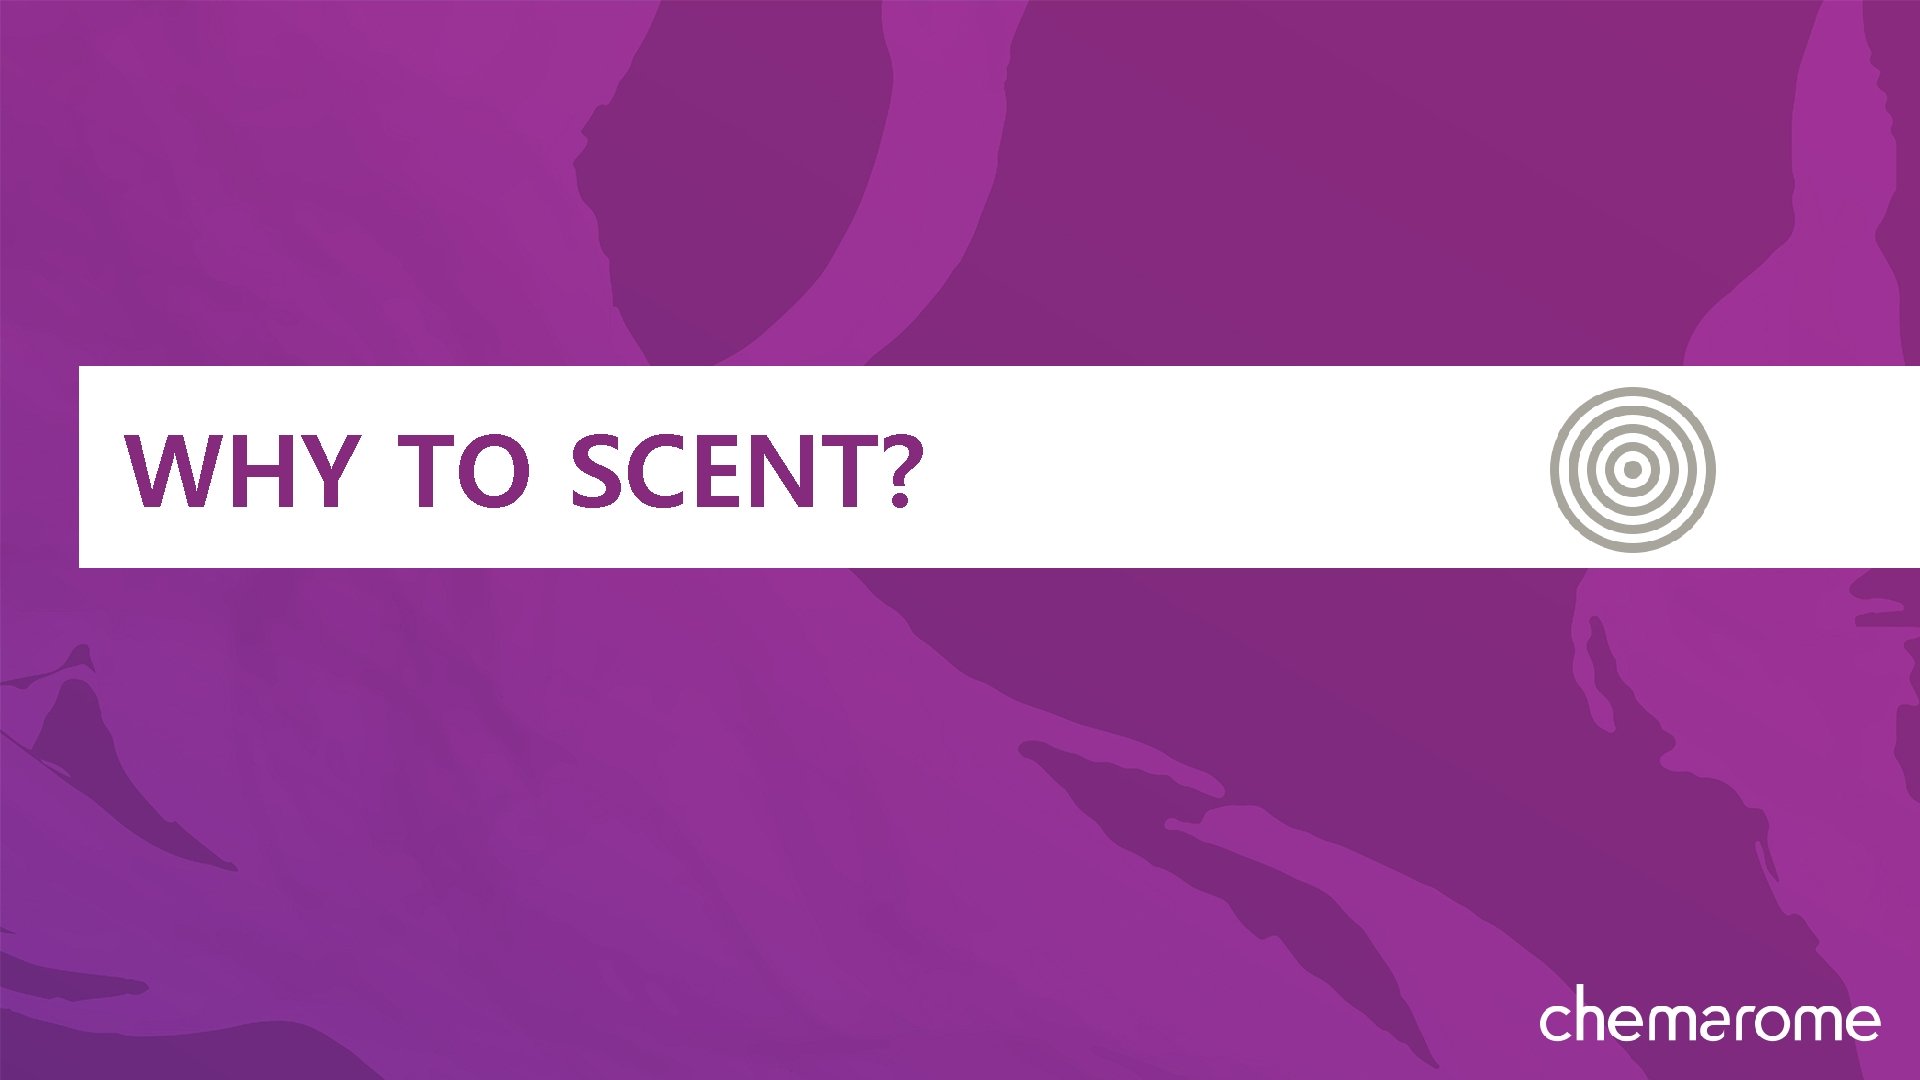 WHY TO SCENT? 